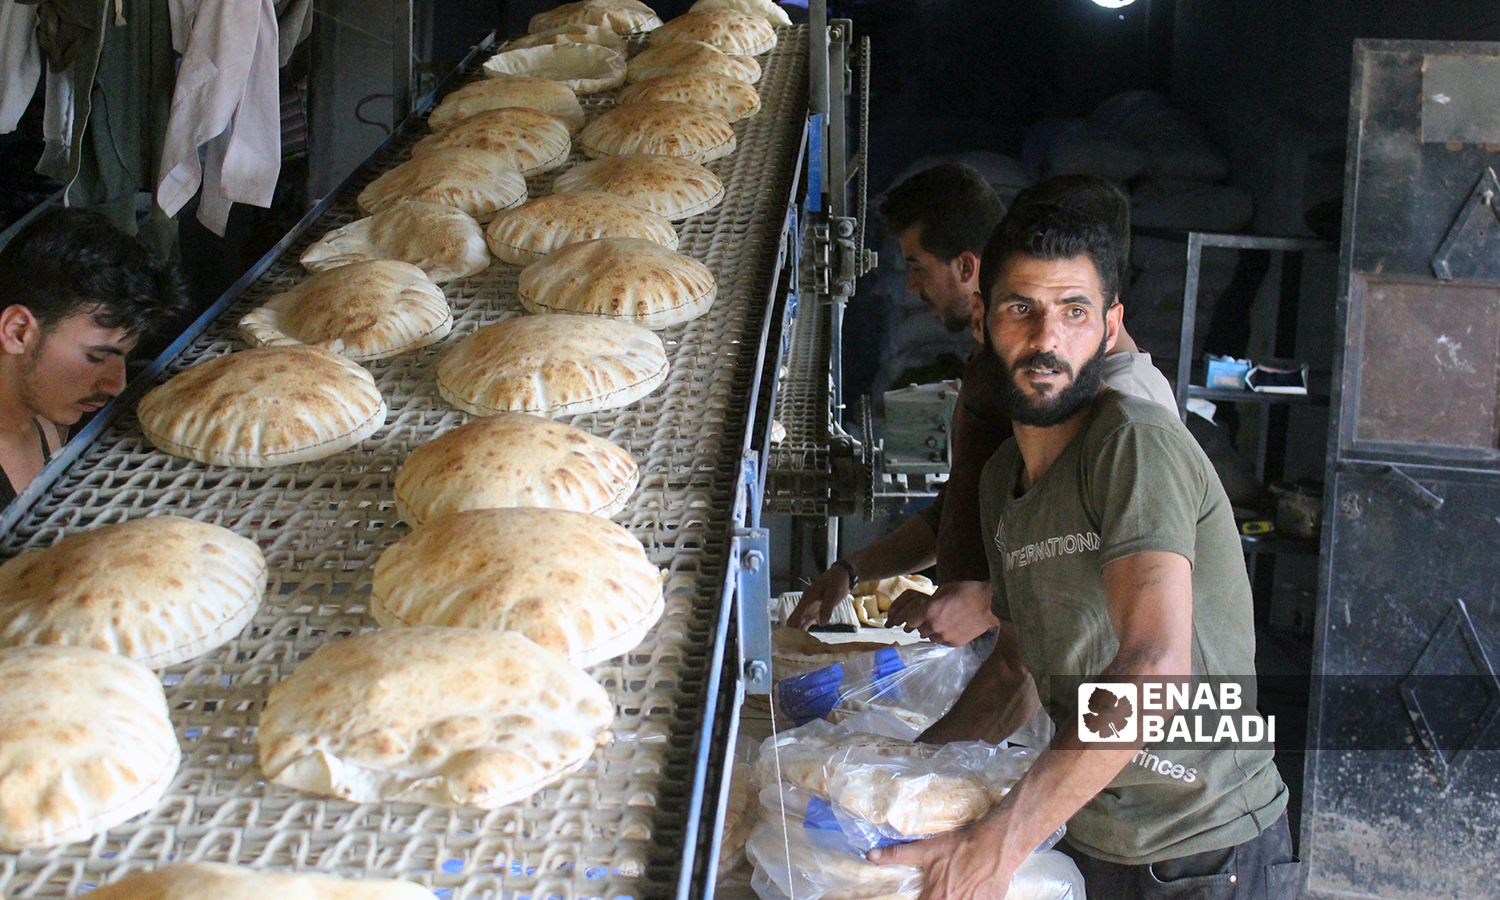 Workers packing bread in nylon bags in the al-Bab city’s automated bakery - 8 October 2021 (Enab Baladi/Siraj Mohammed)